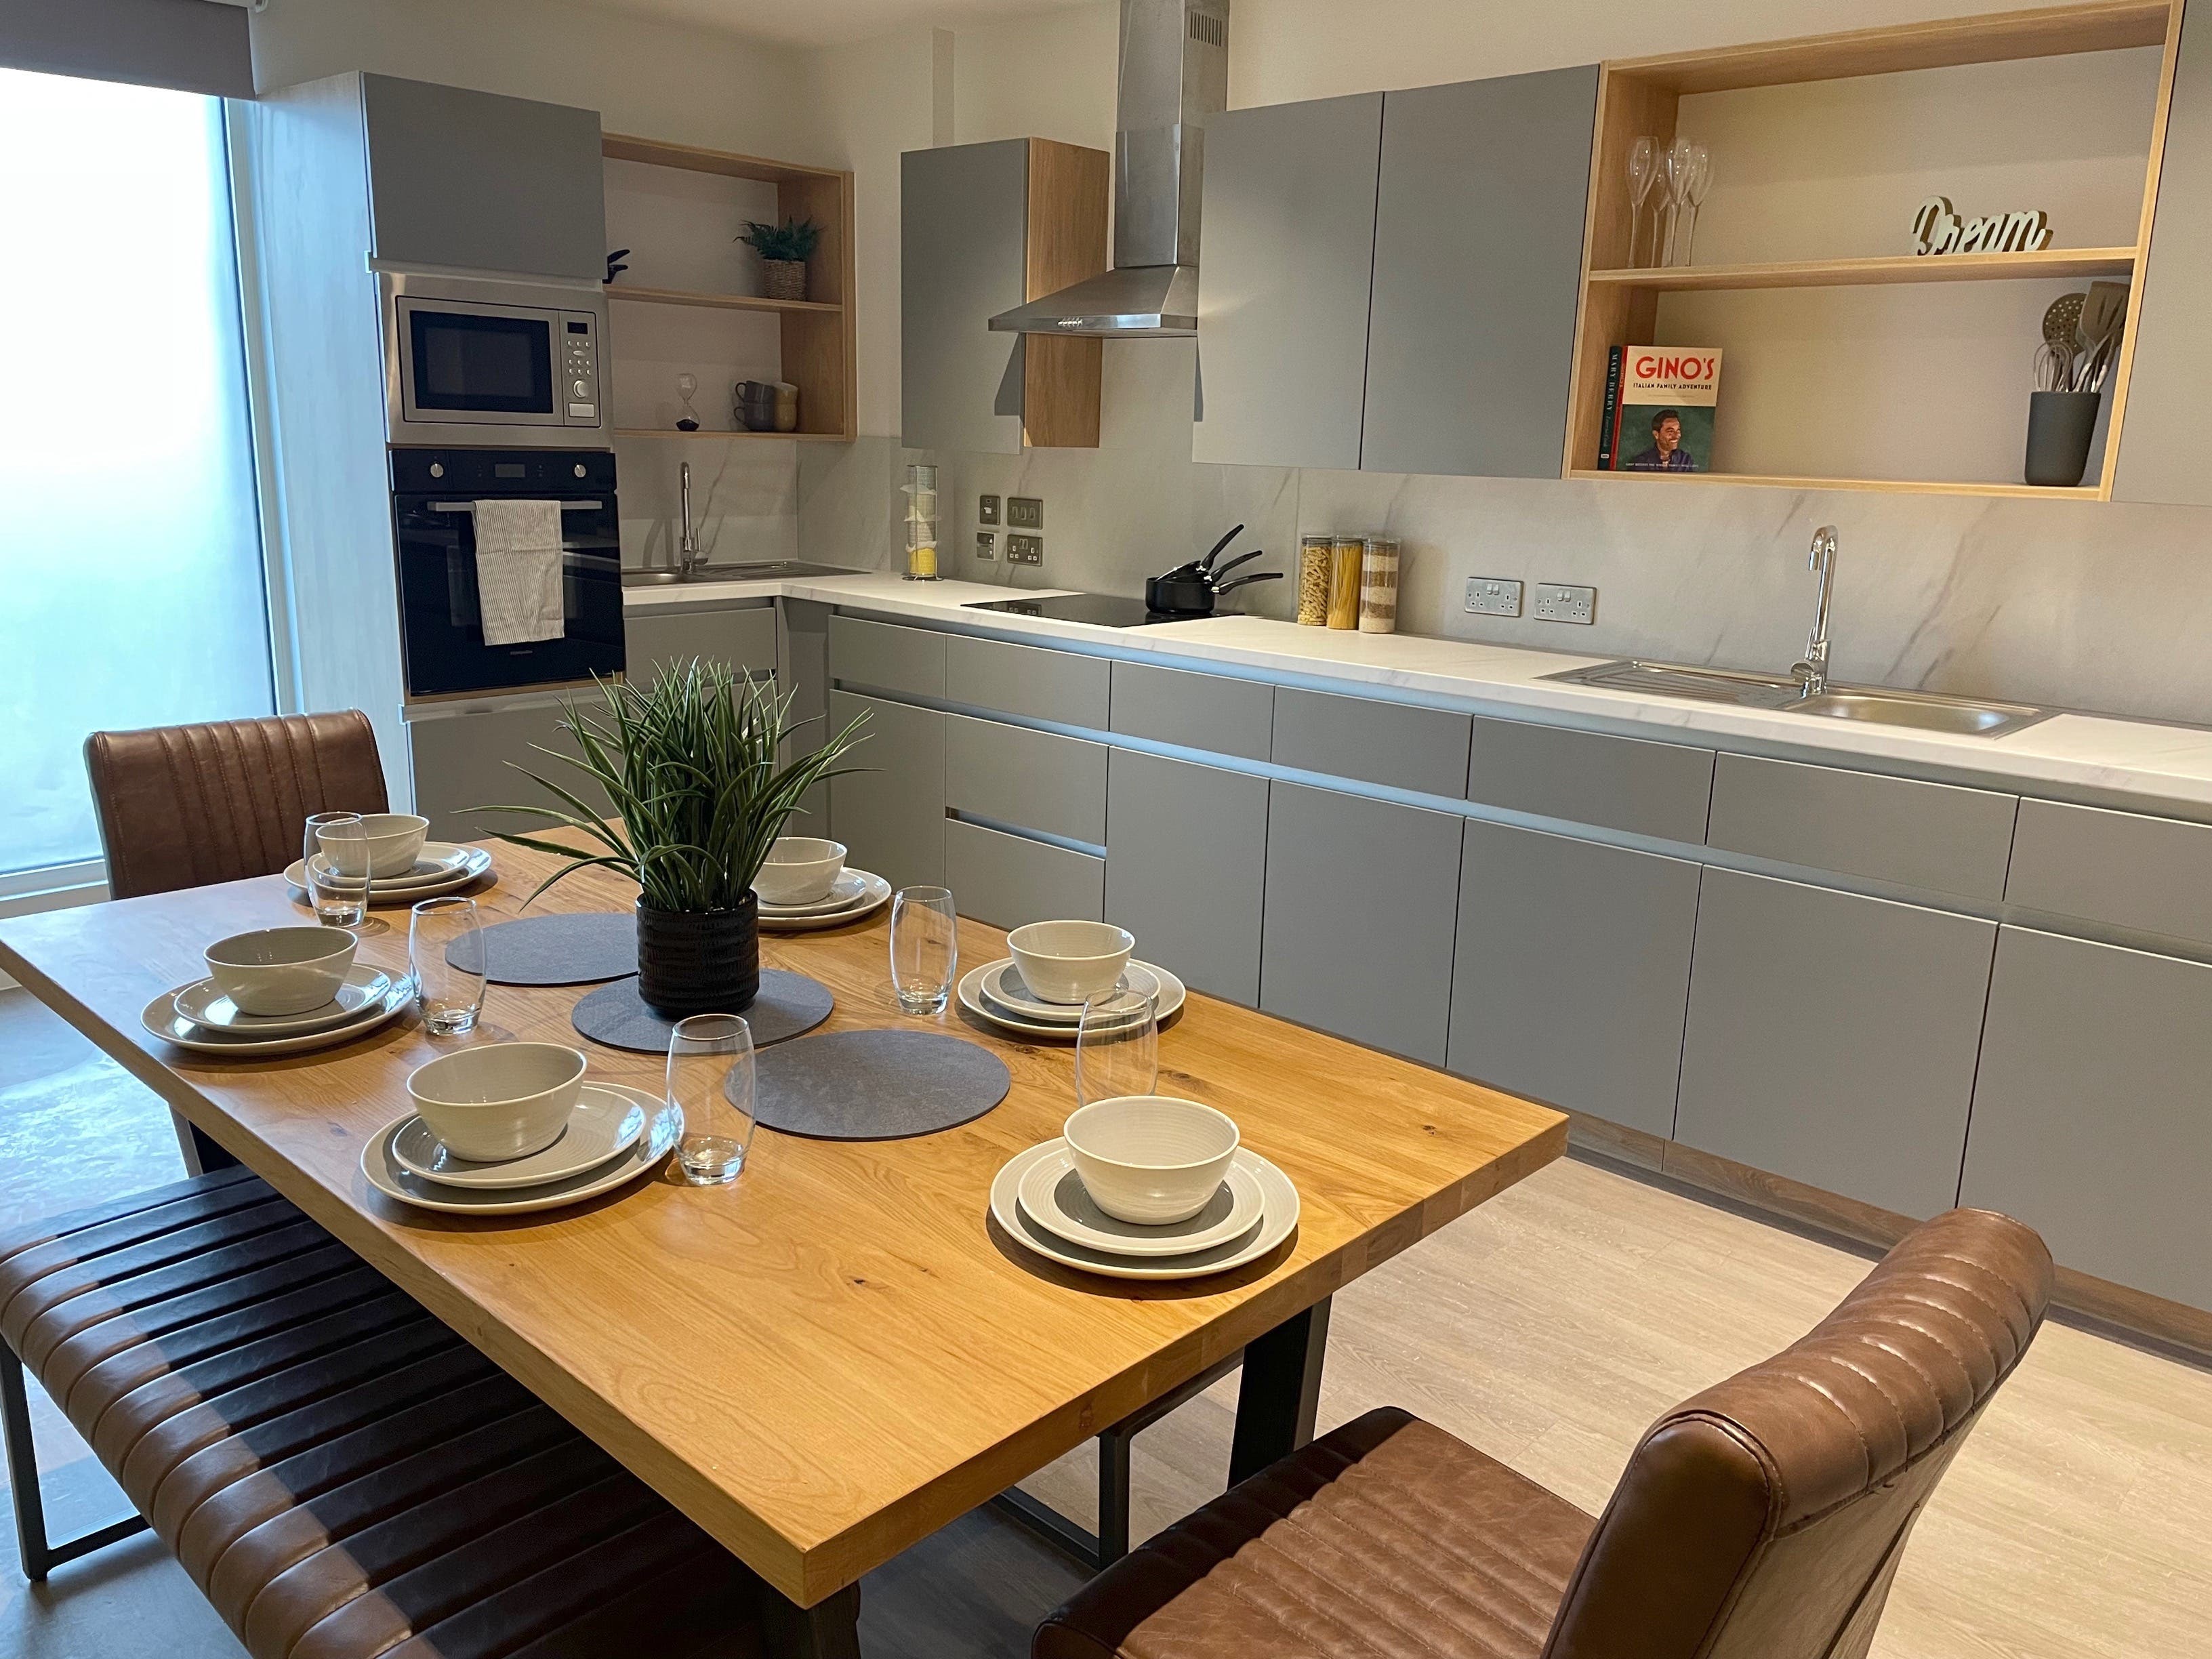 A shared kitchen available at Student Roost